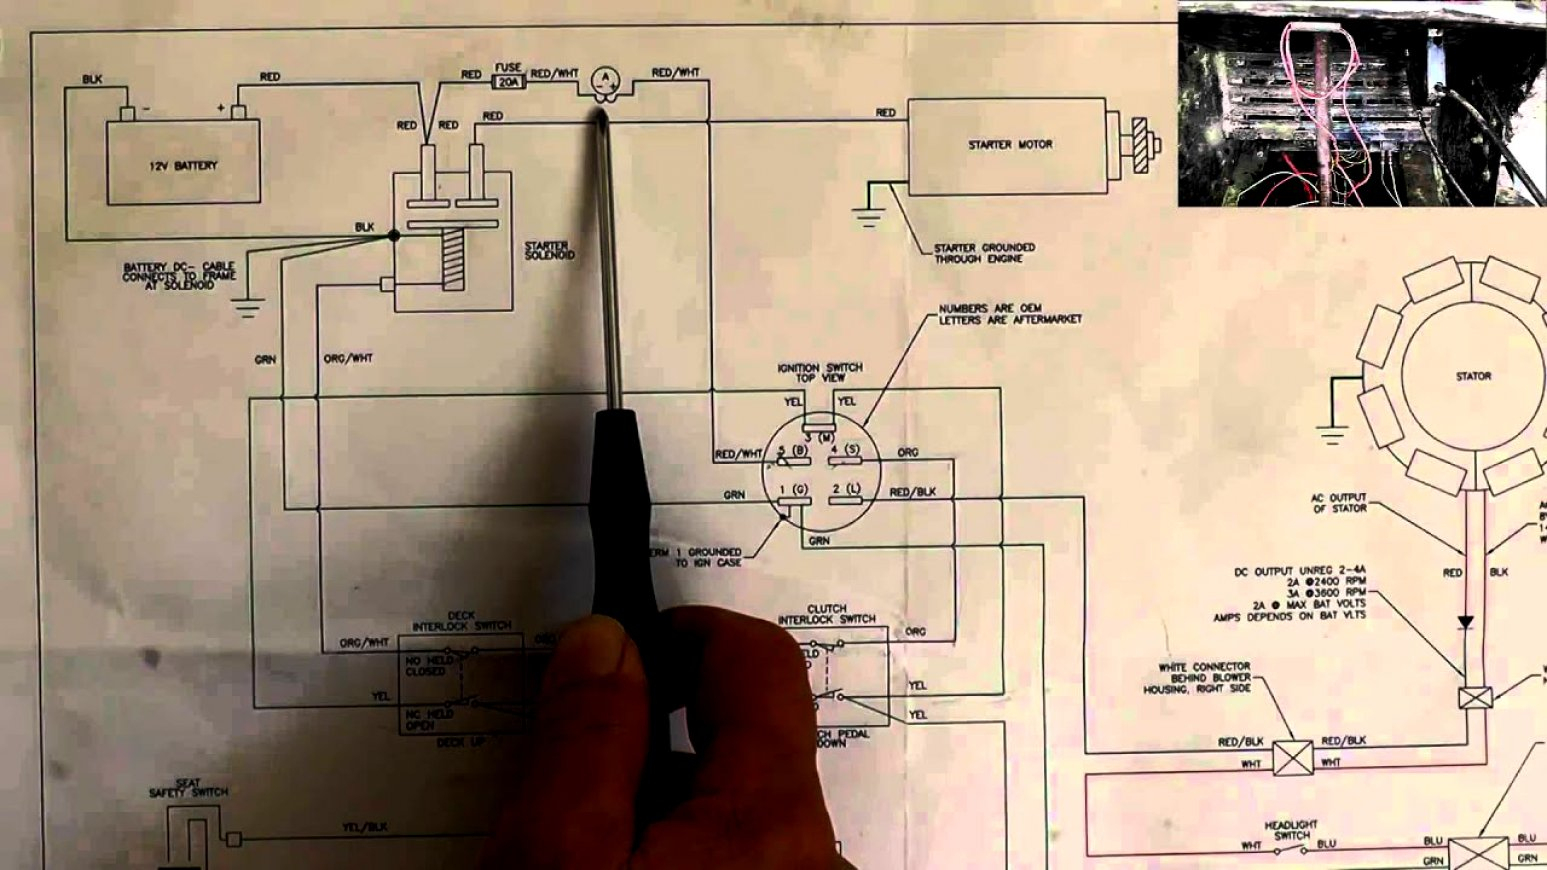 Wright Stander Wiring Diagram - Trusted Wiring Diagram - Bad Boy Wiring Diagram